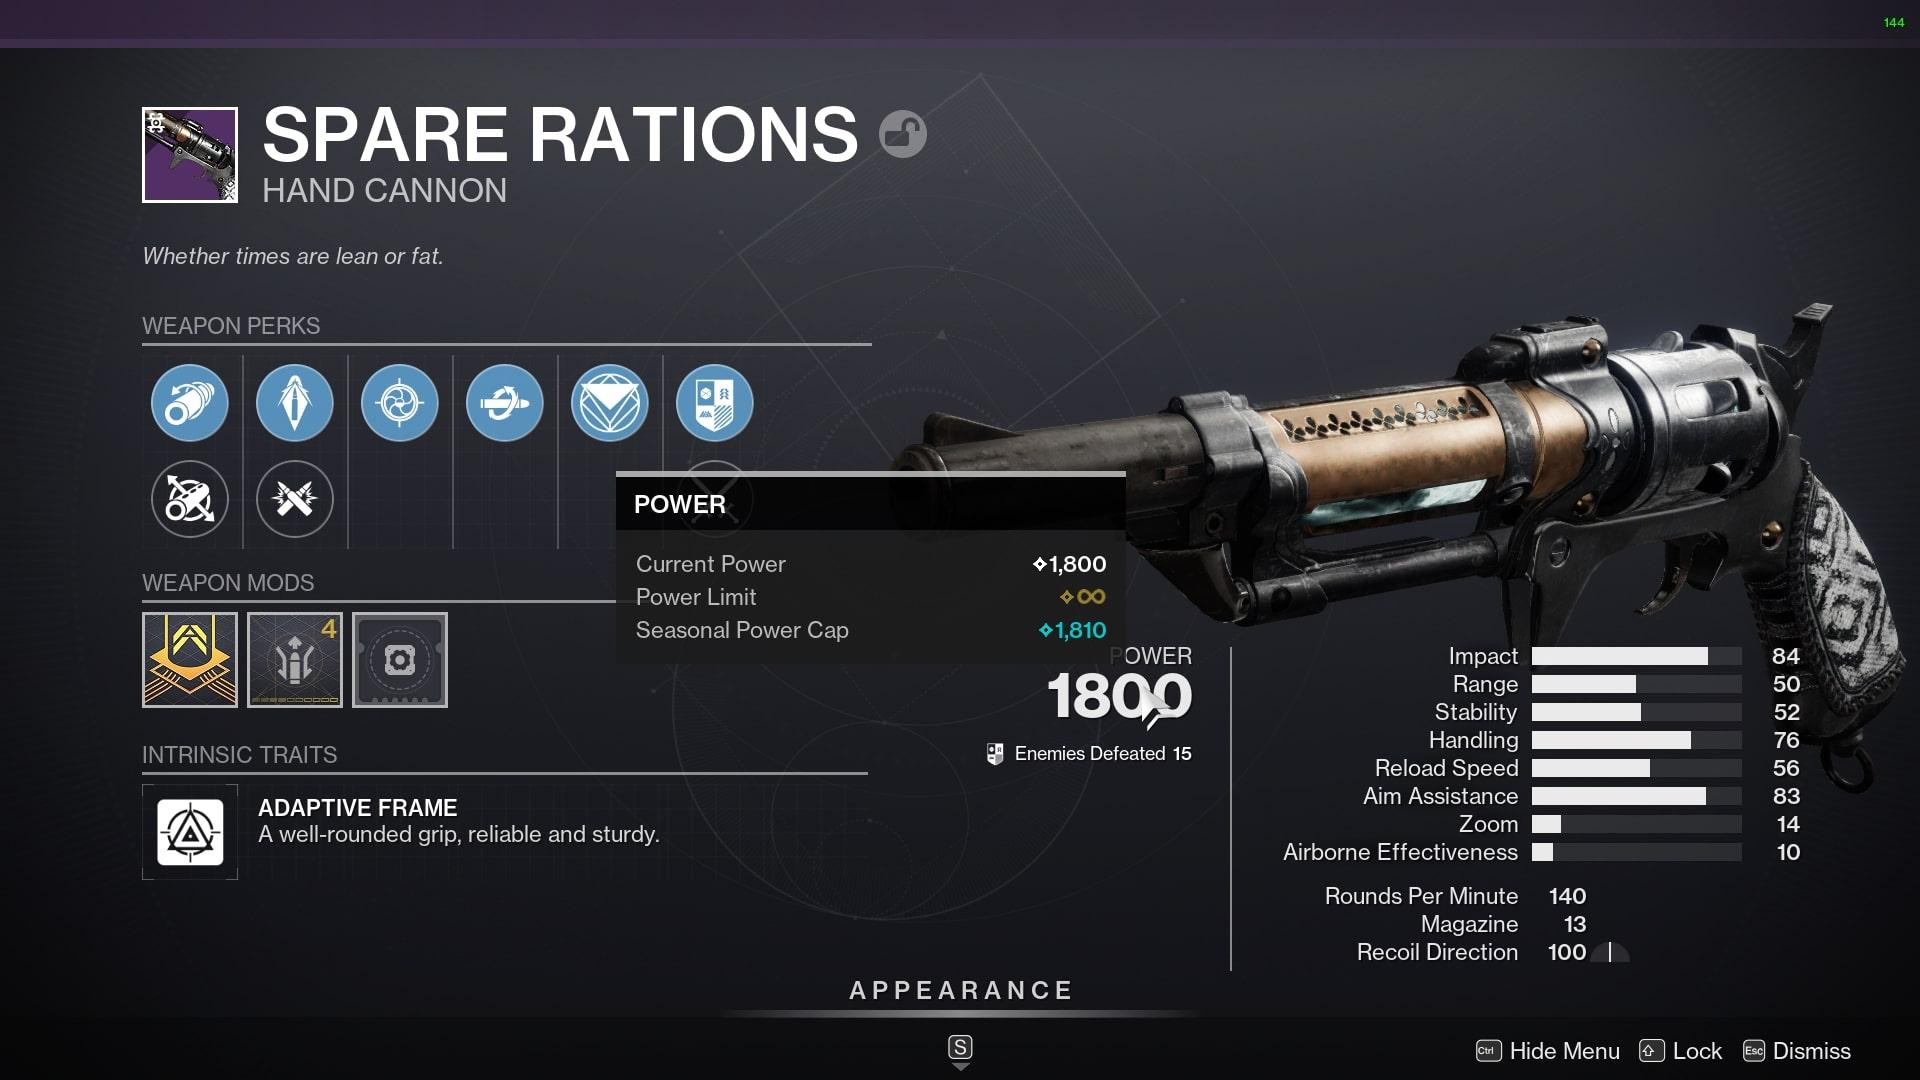 Spare rations kinetic weapon in Destiny 2